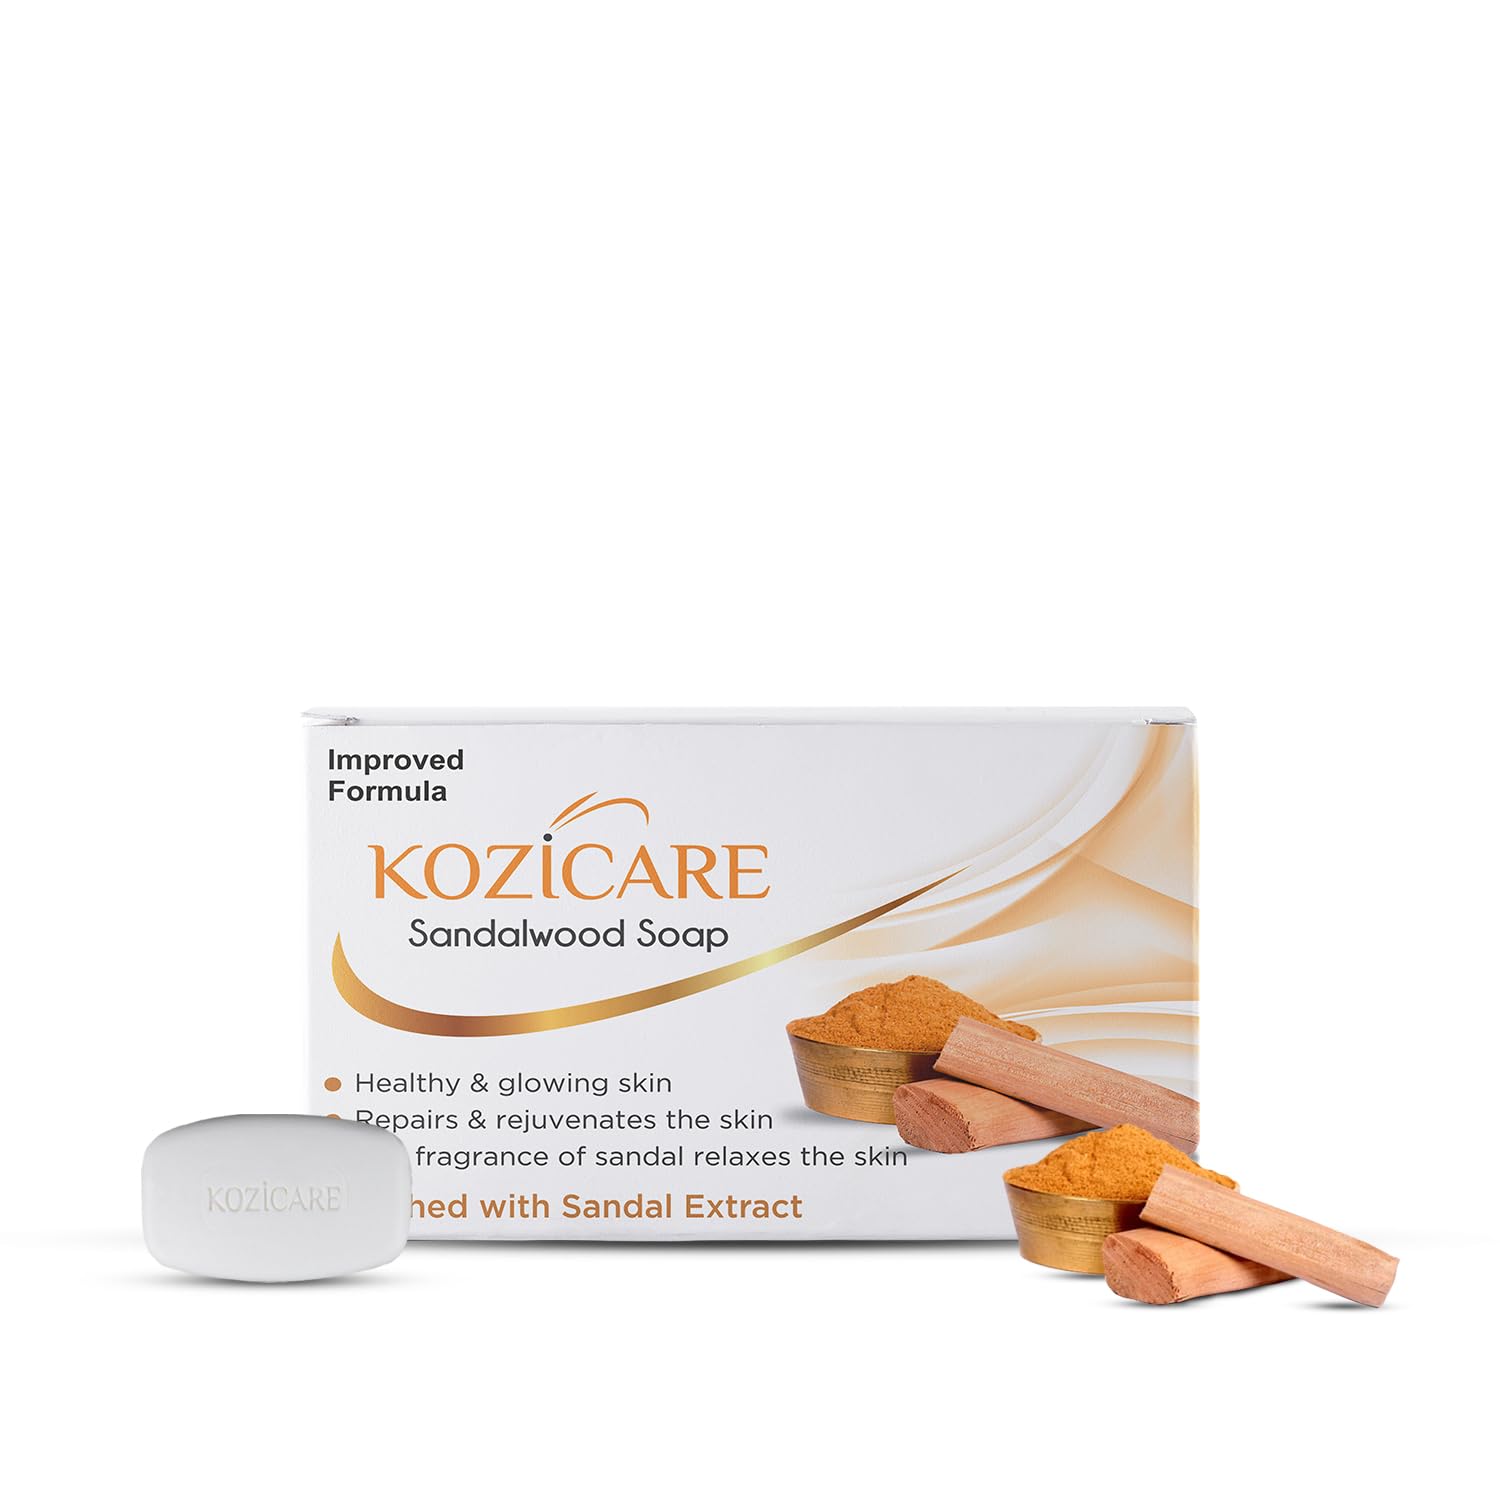 Kozicare Sandalwood Bath Soap for Younger Looking and Glowing Skin | with a Long-Lasting Youthful Radiance |For Man, Women and All Skin types-75gm (Pack of 6)